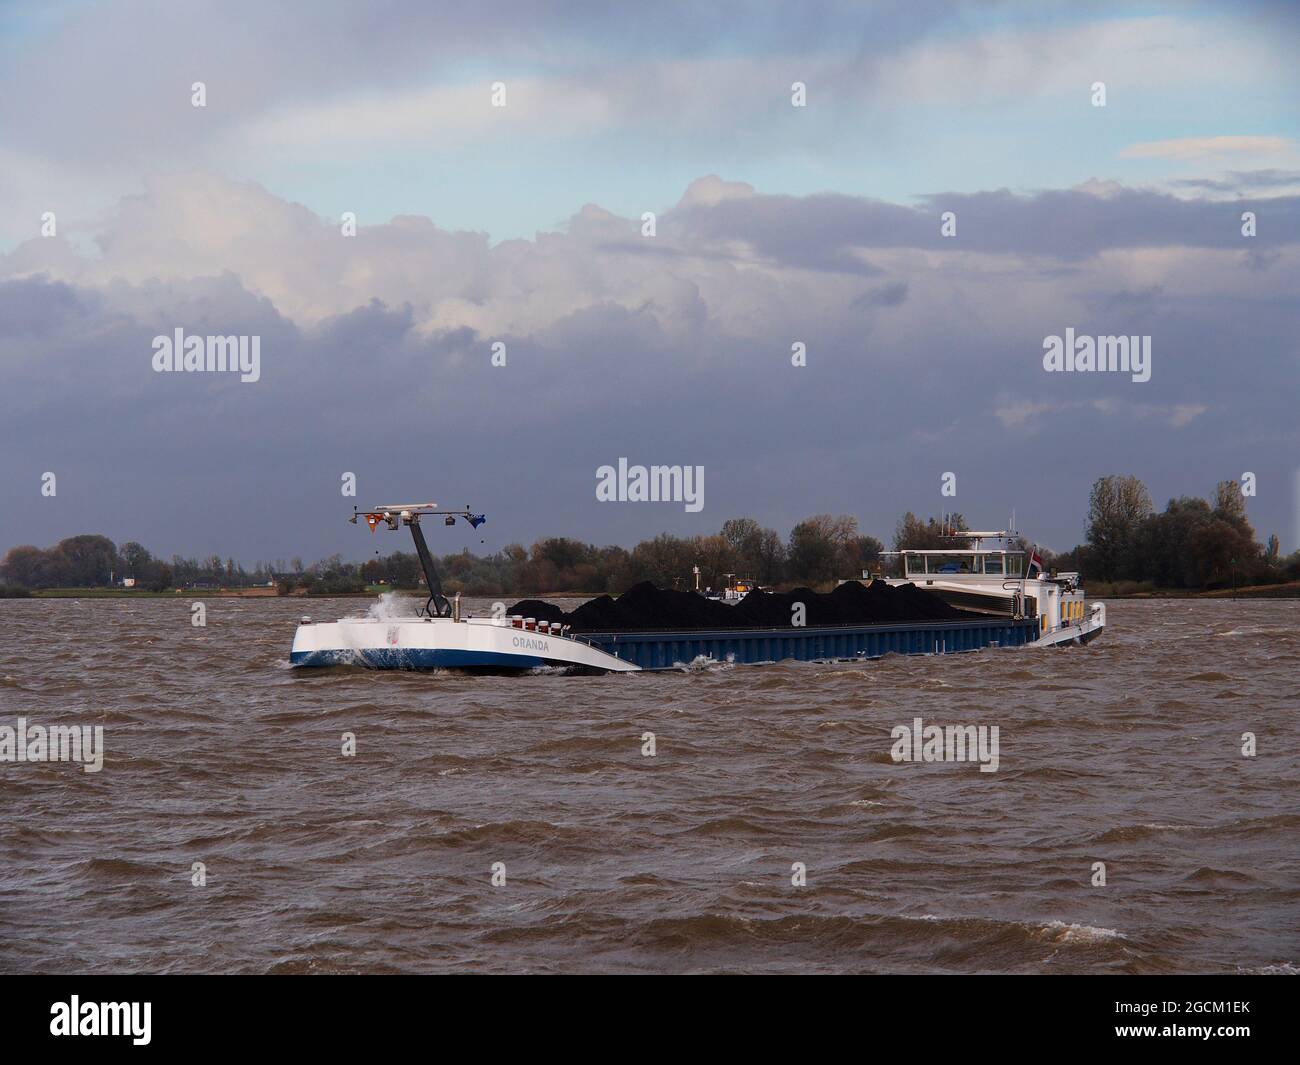 Commercial shipping on the River Rhine in Germany under blue dramatic skies Stock Photo